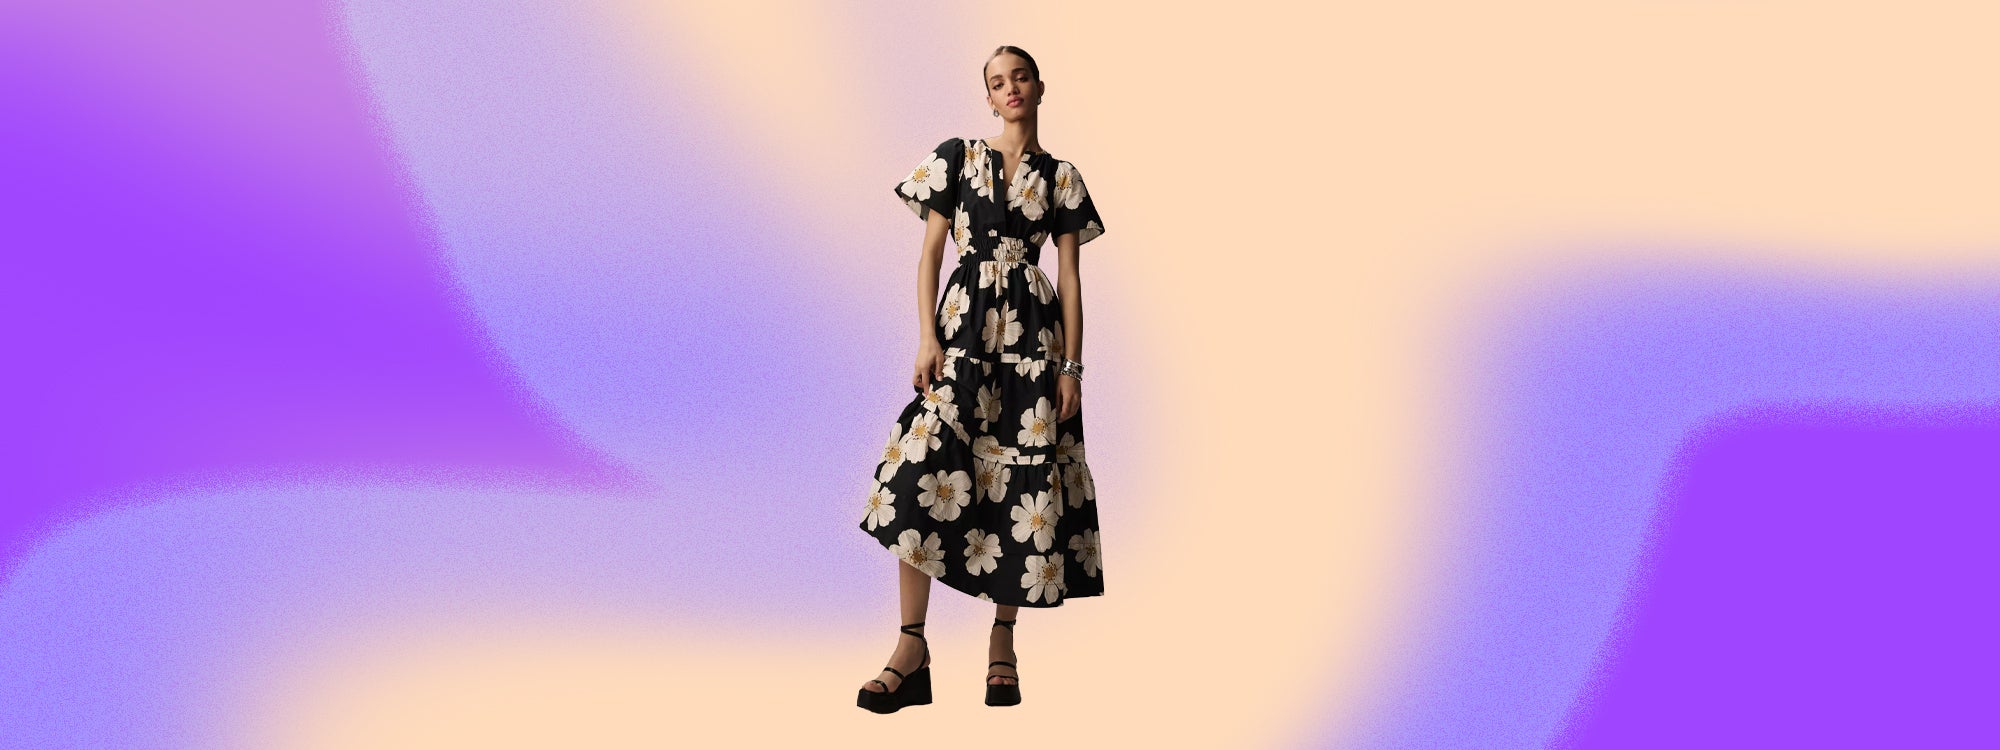 Anthropologie Dresses Trending For Spring, Ranked By Twirl-Happy Reviewers